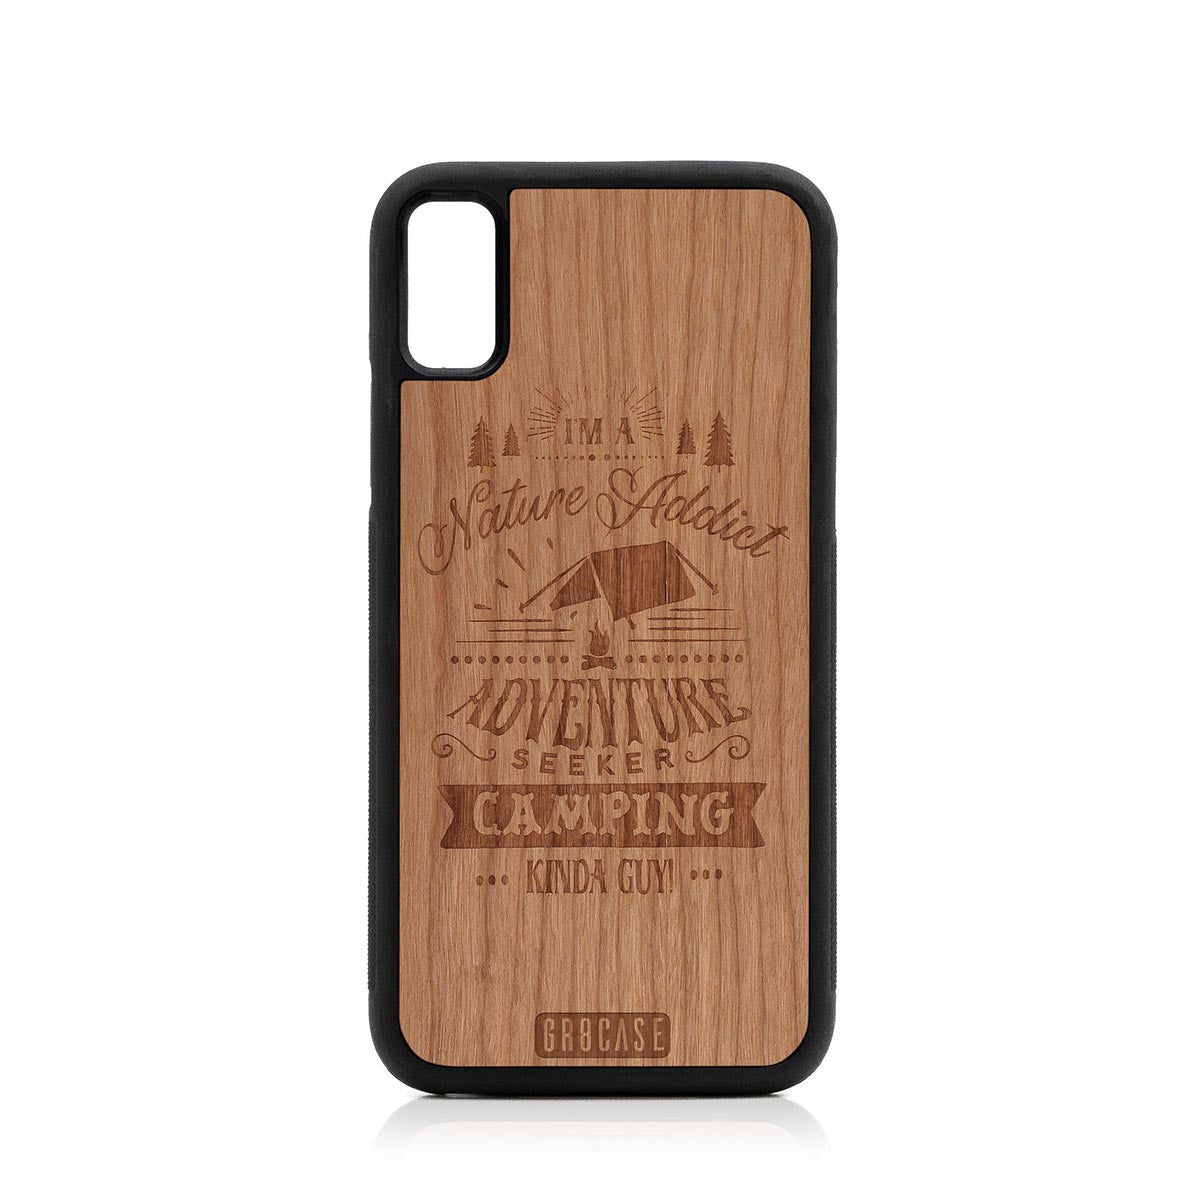 I'm A Nature Addict Adventure Seeker Camping Kinda Guy Design Wood Case For iPhone X/XS by GR8CASE